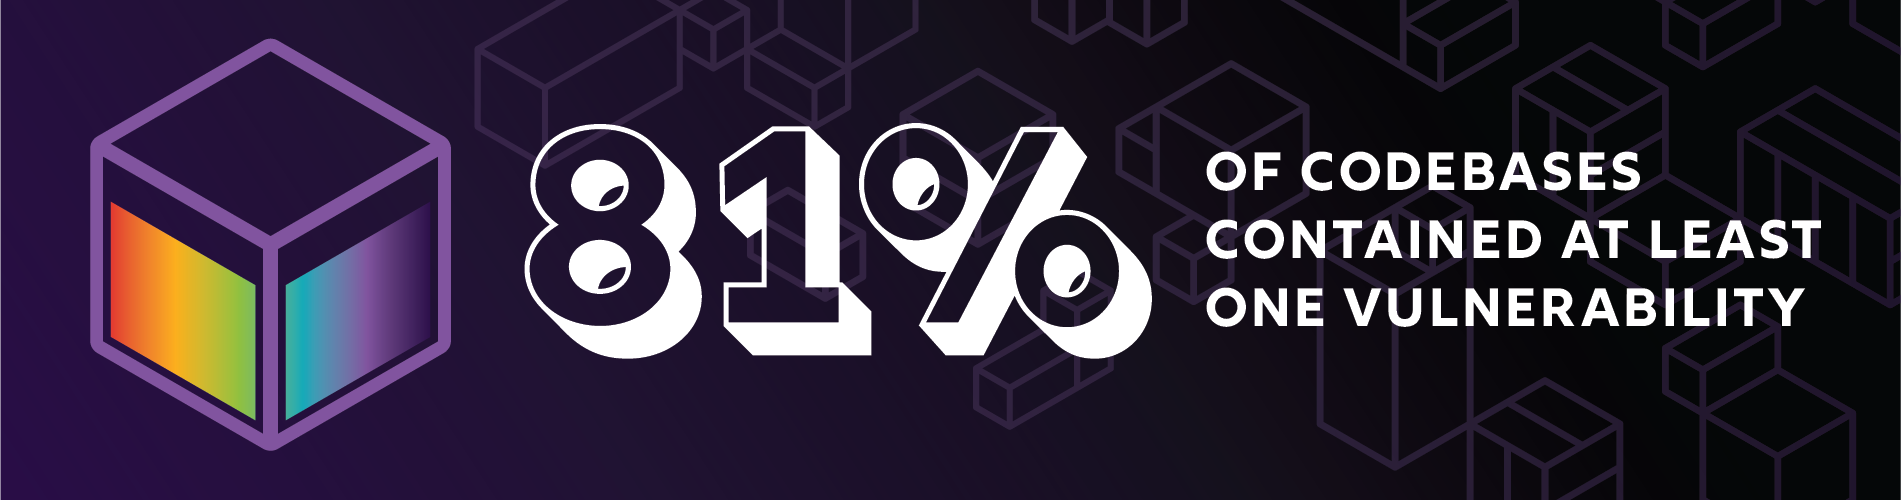 81% of codebases contained at least one vulnerability | Synopsys